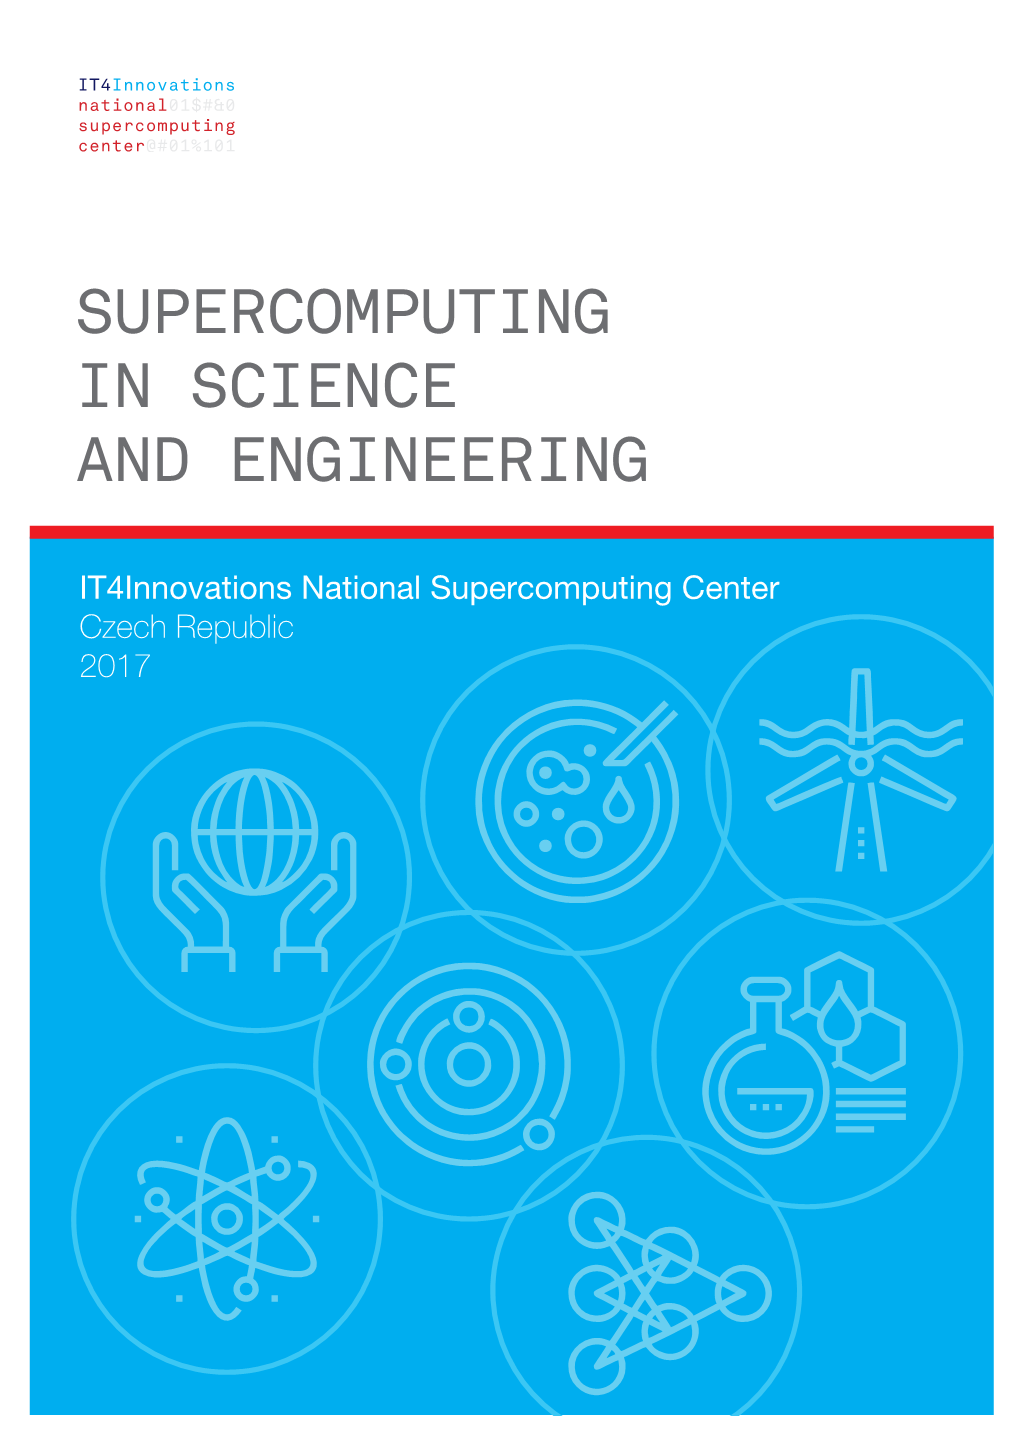 Supercomputing in Science and Engineering